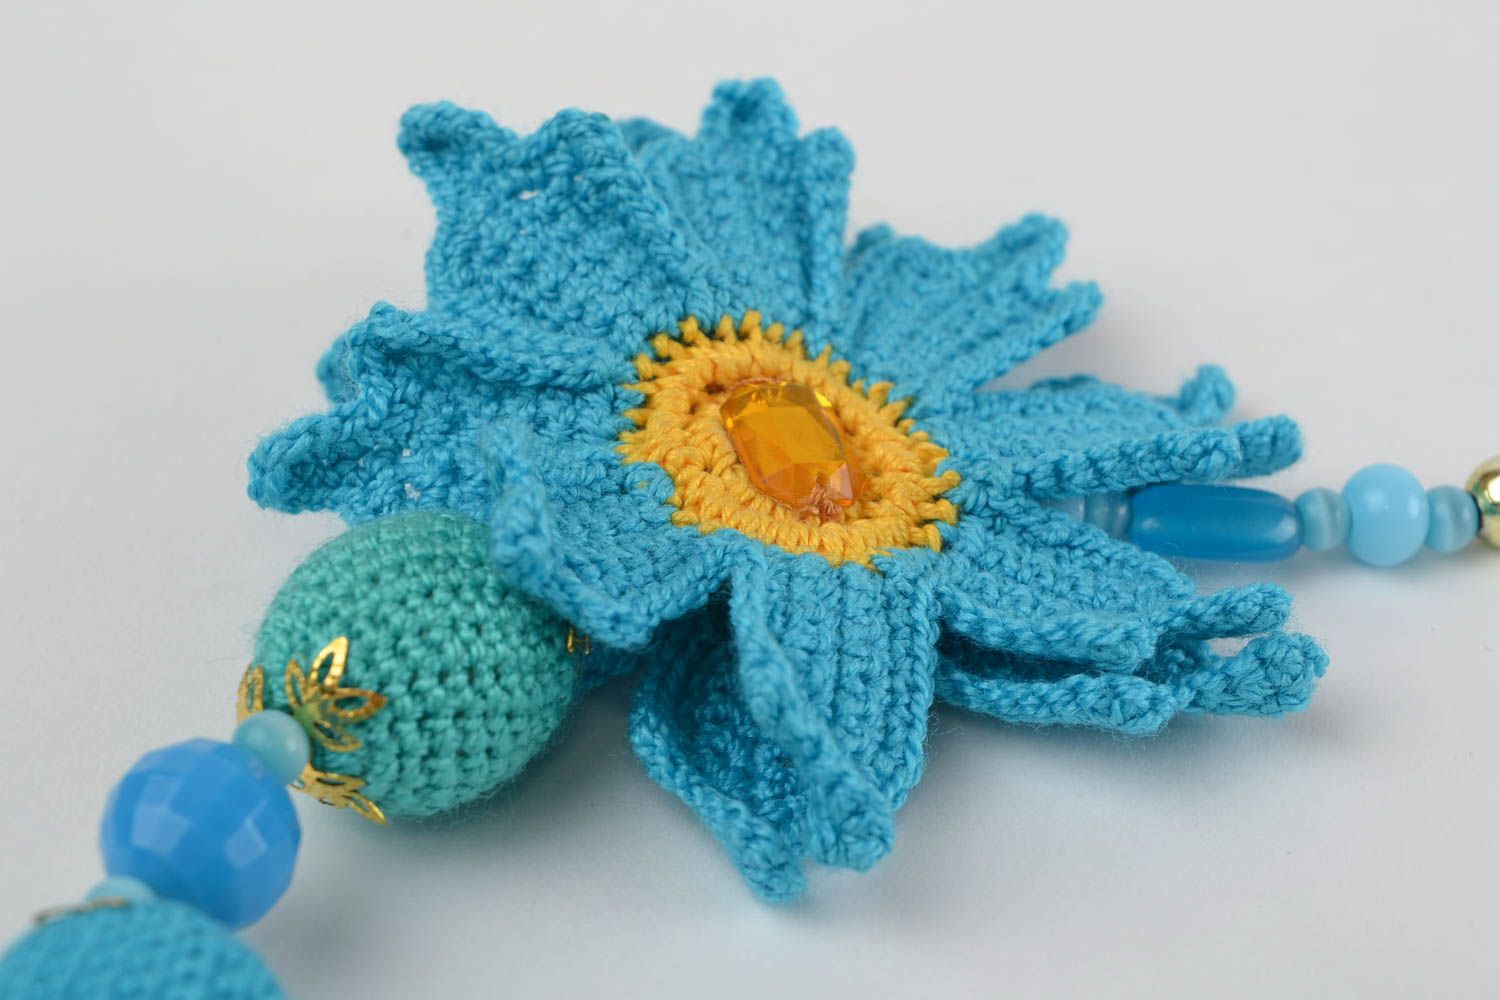 Handmade blue crochet ball necklace with beads and flower babywearing necklace photo 4